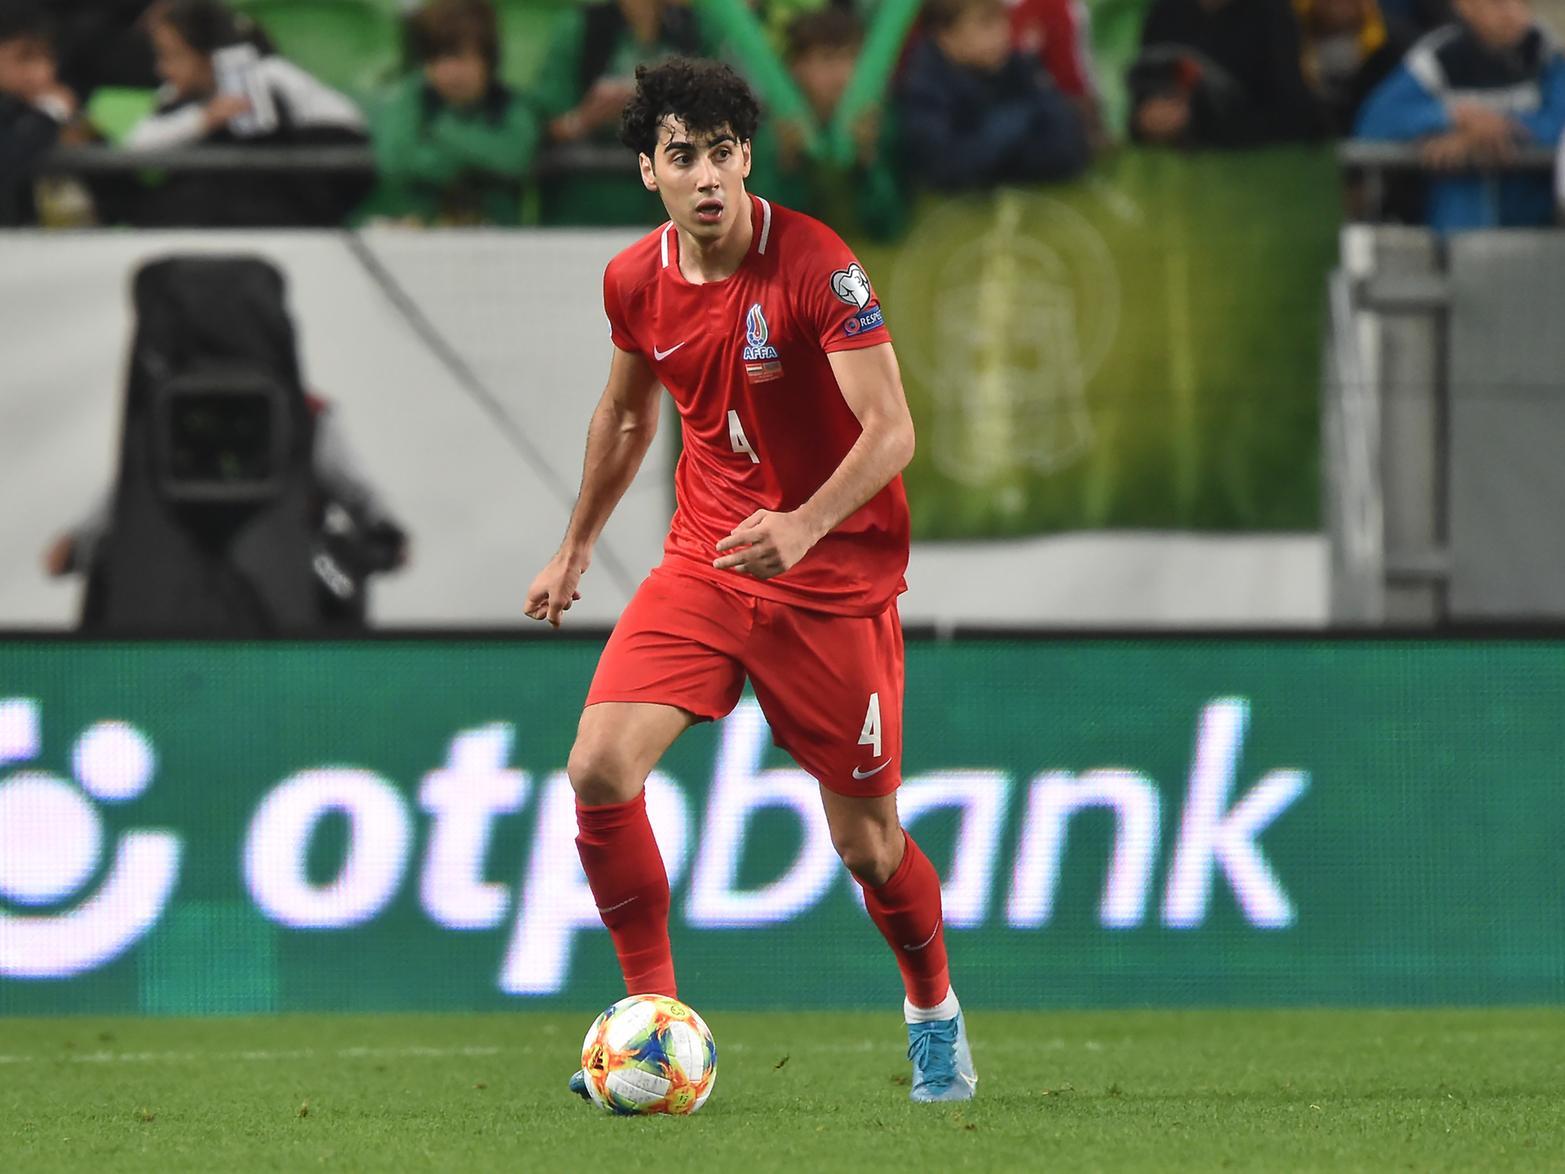 Bahlul Mustafazade, the Azerbaijan international defender linked with Celtic and Sunderland over the past 12 months, has again reiterated his desire to play overseas. (The Scotsman)